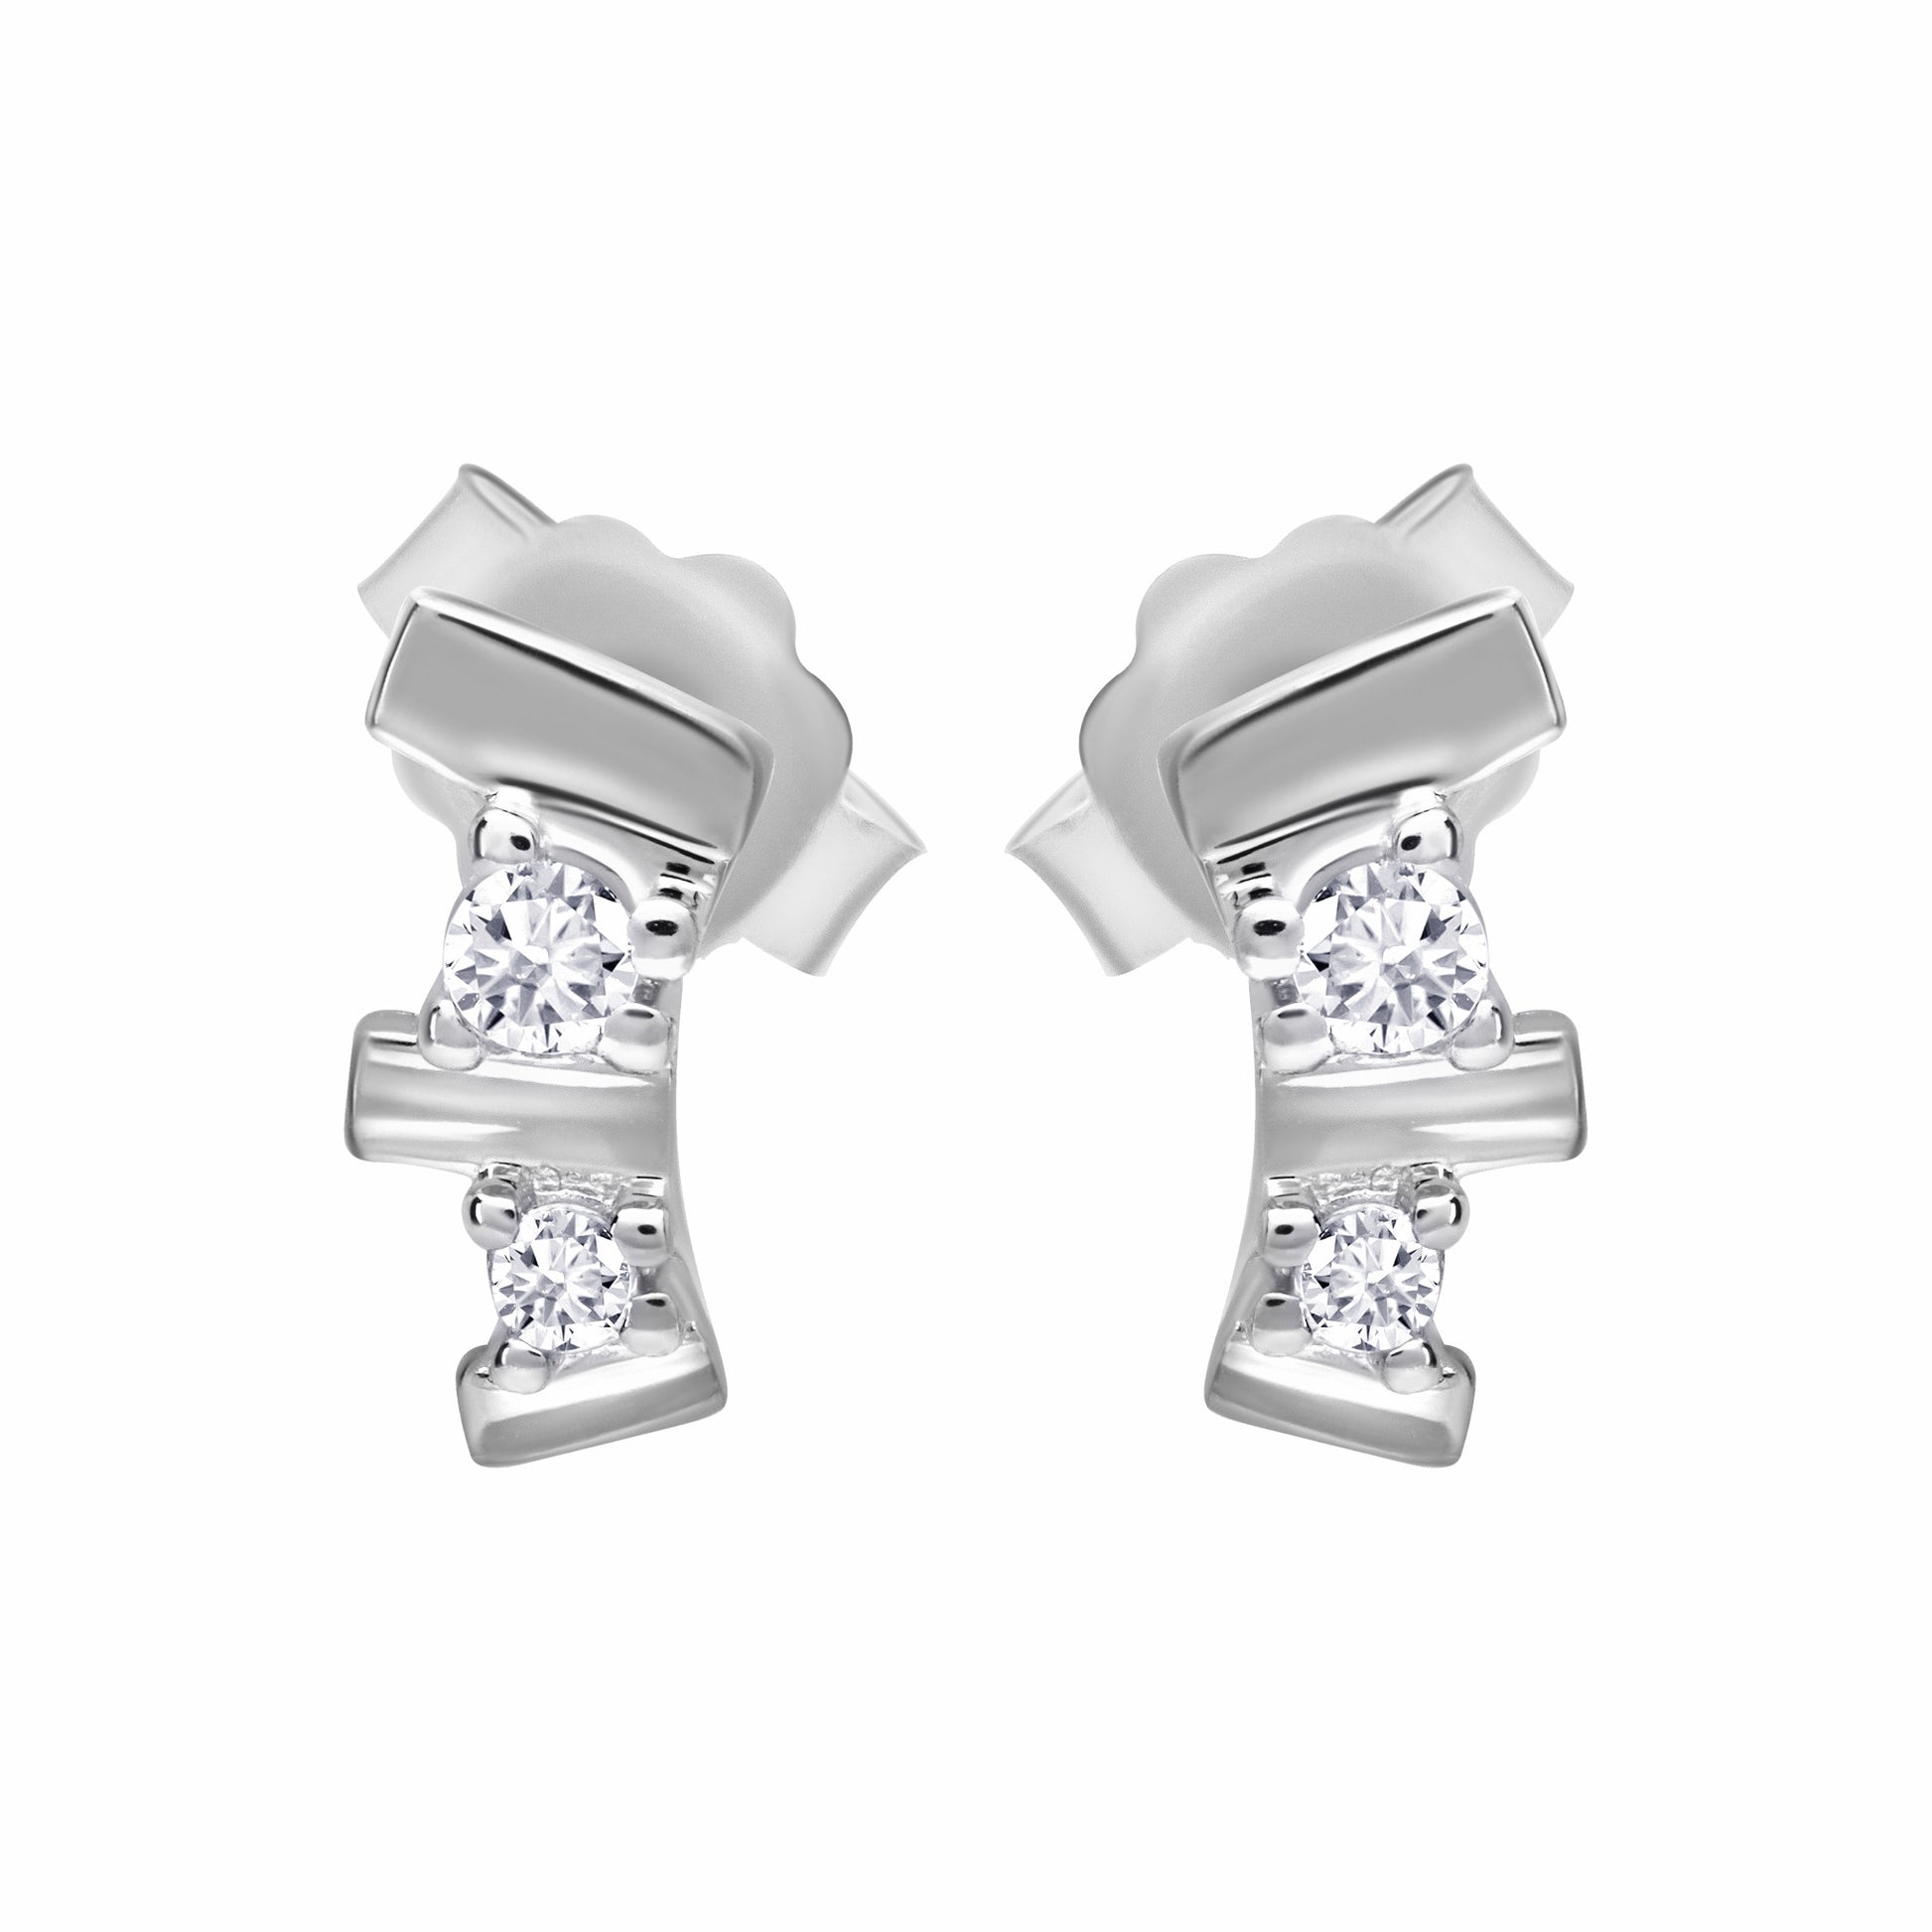 Trilogy silver Earrings on white background